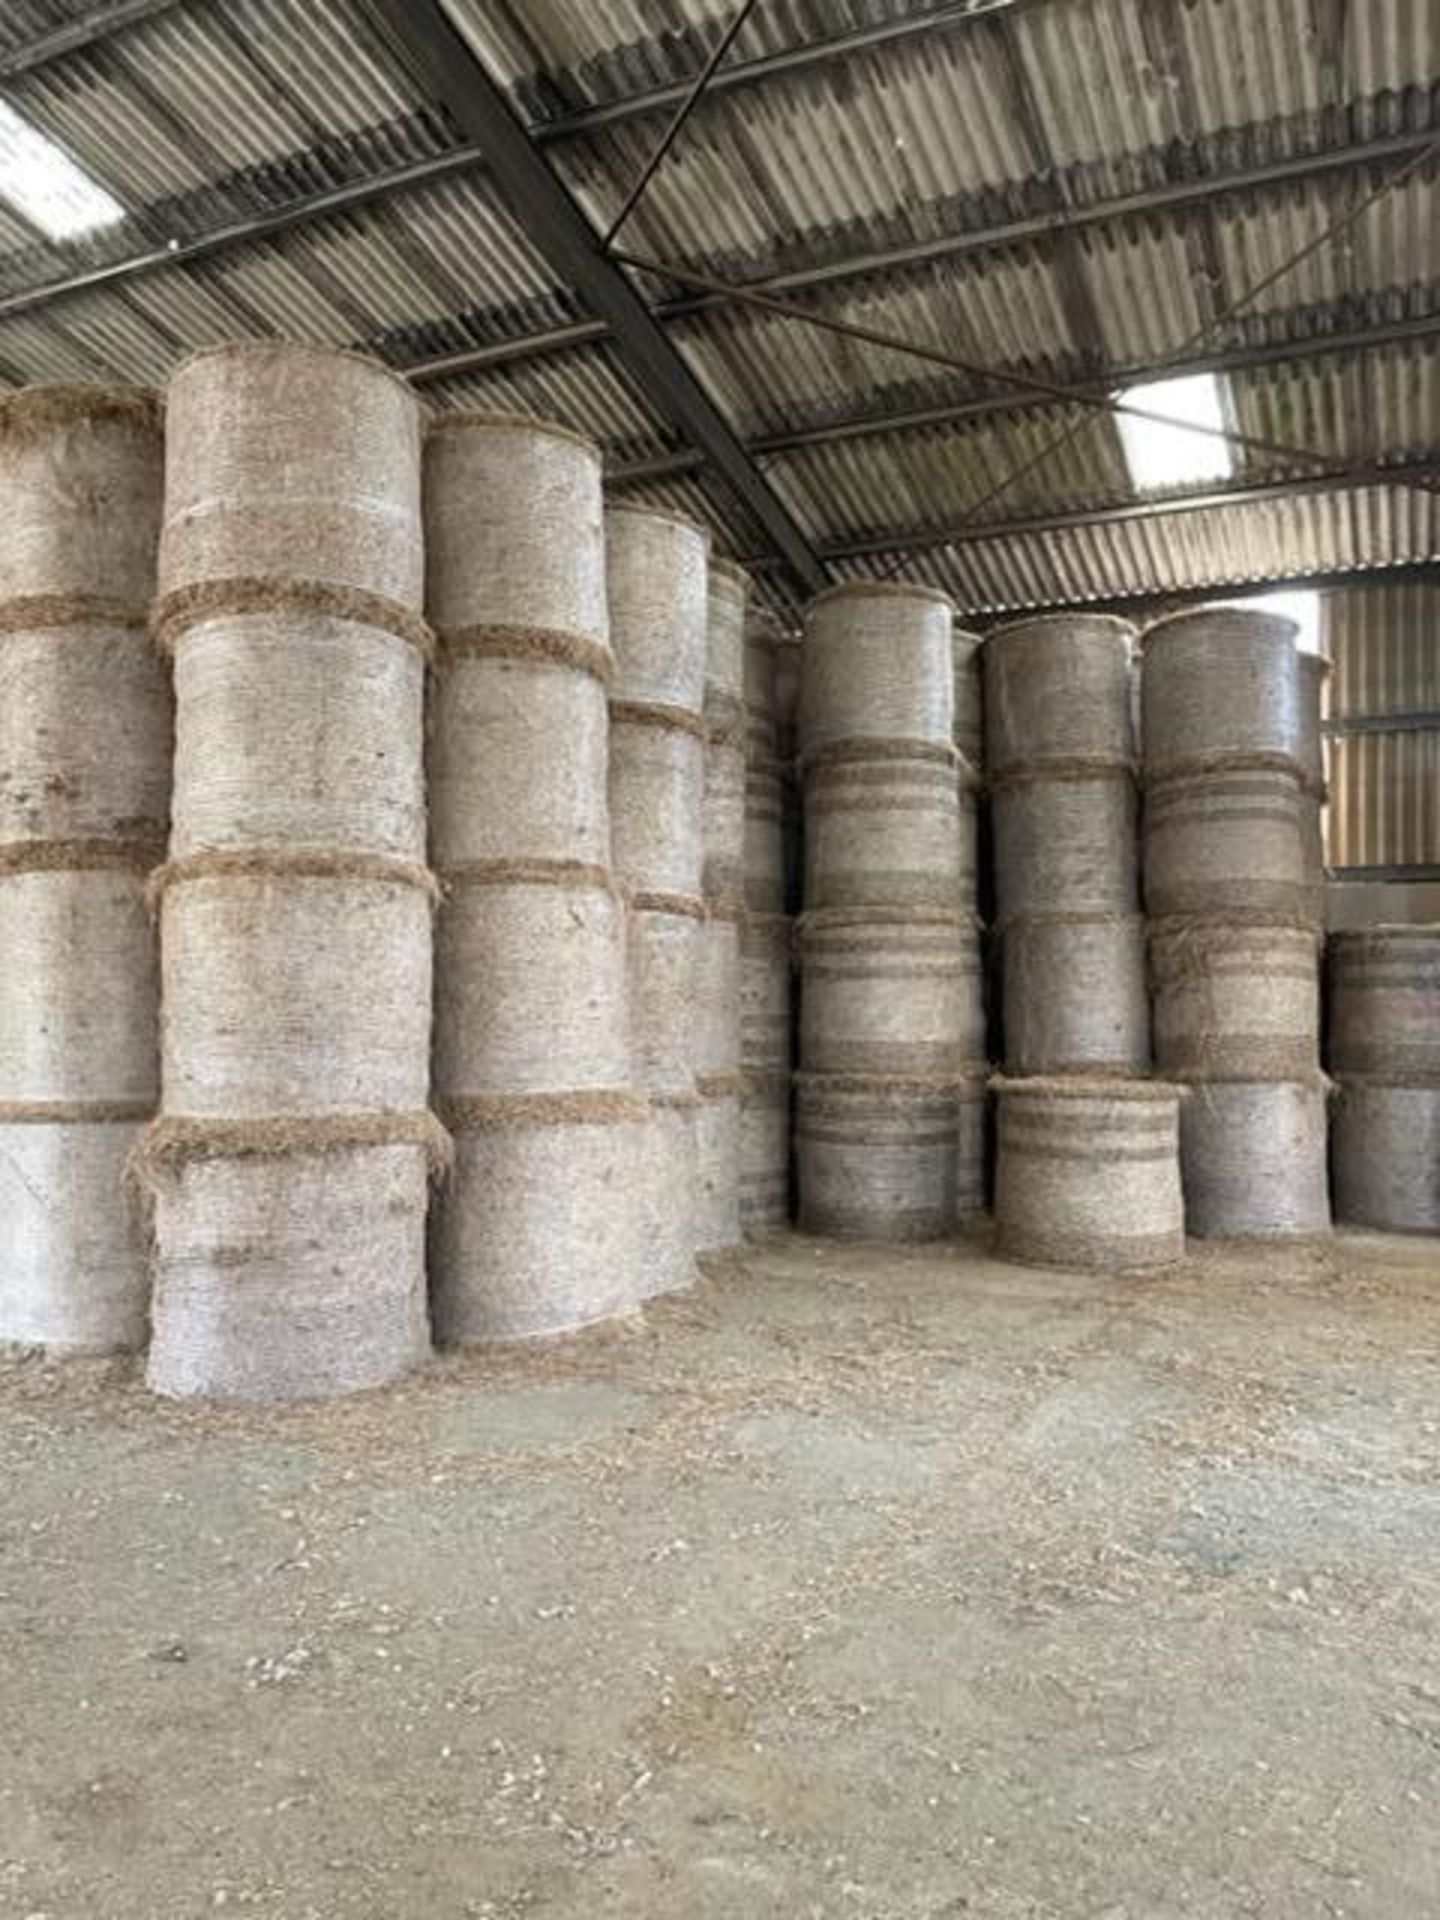 20 x 2021 Round Baled Hay From Organic AB8 - Image 2 of 2